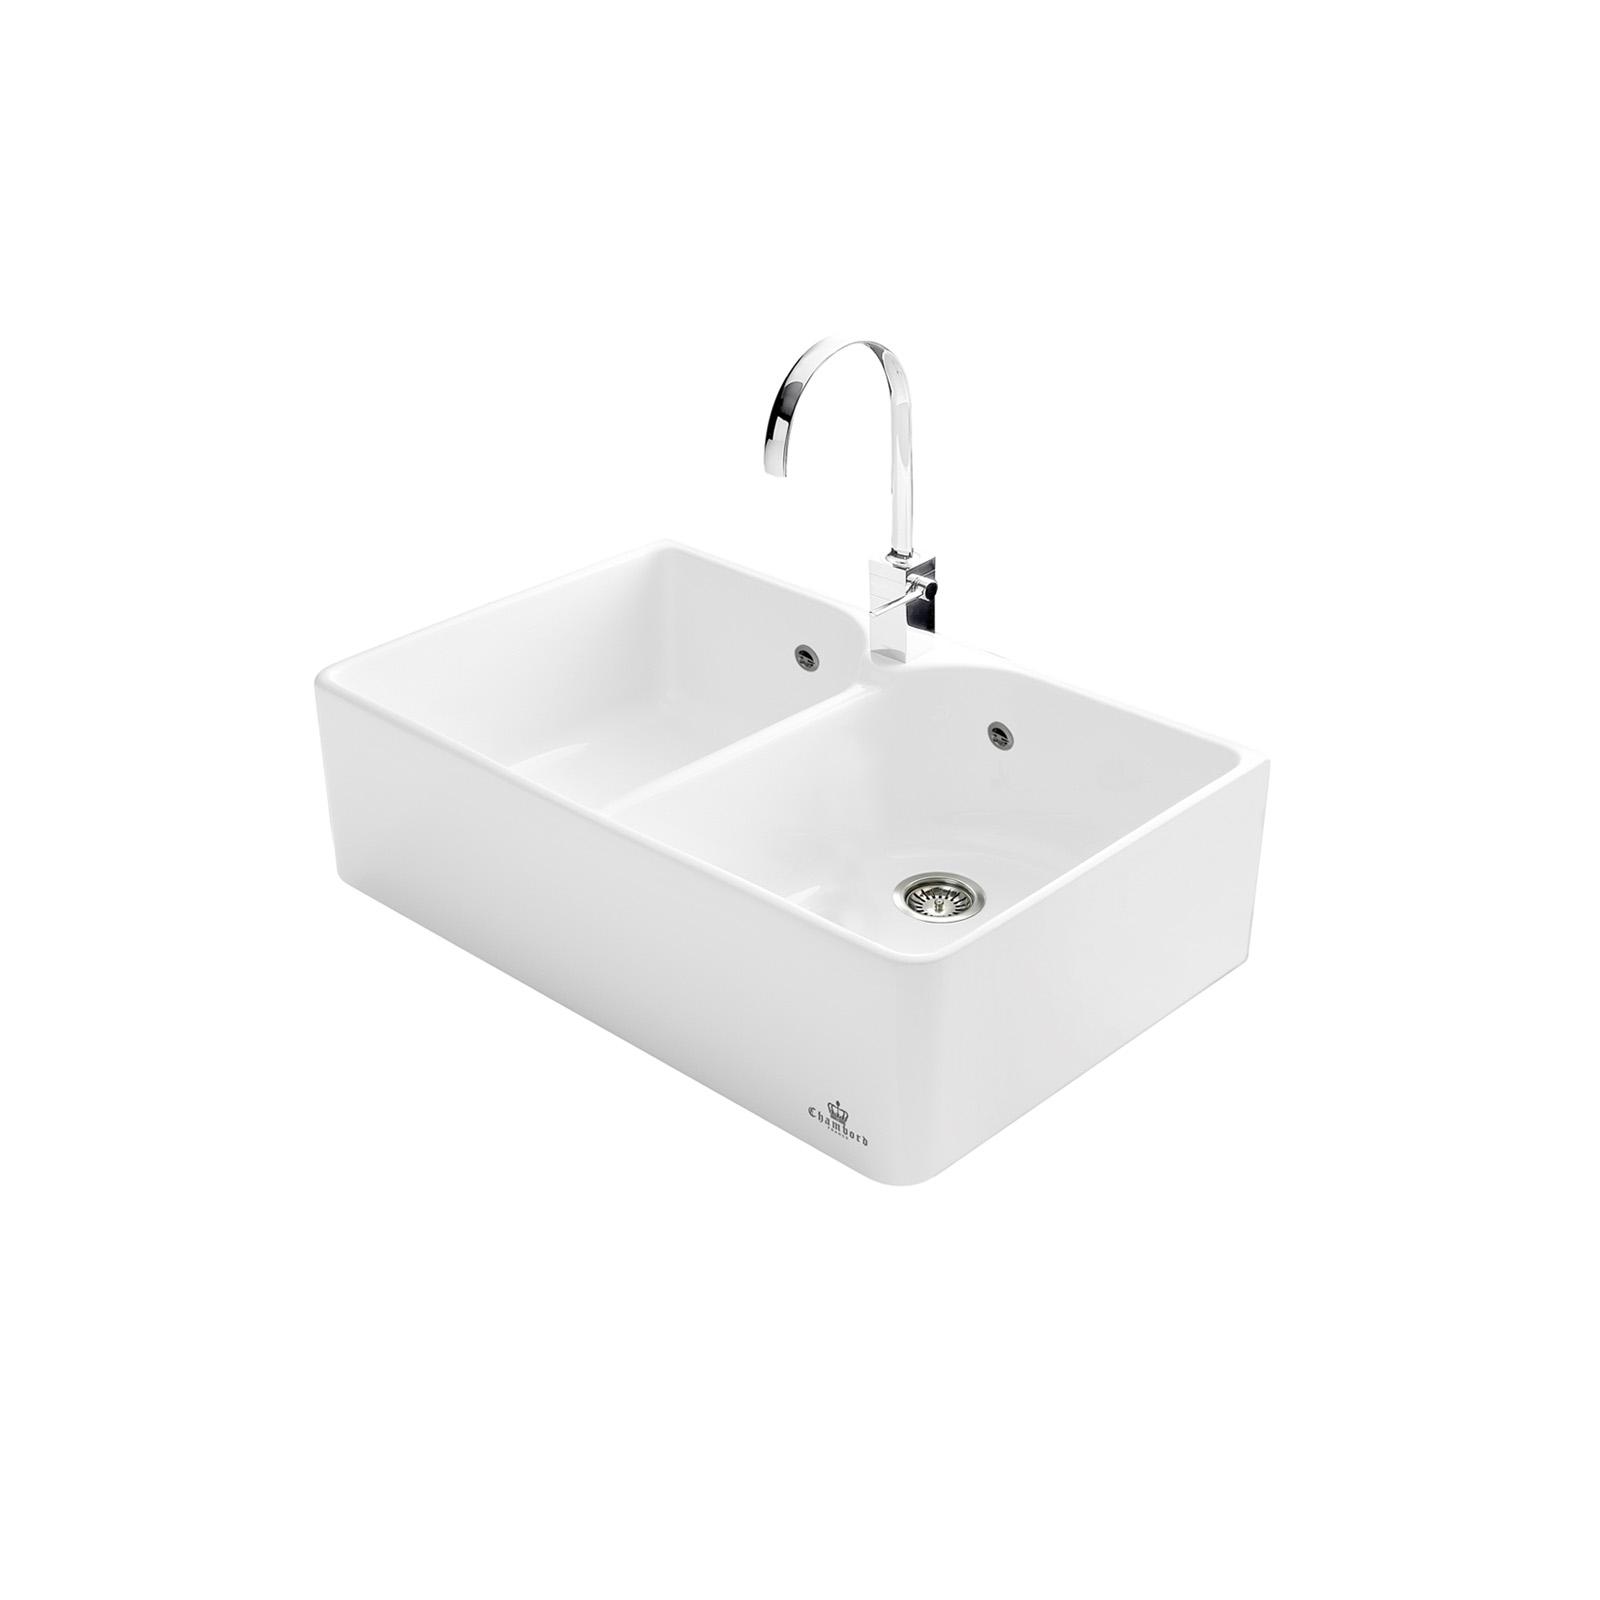 High-quality sink Clotaire II - two bowls, ceramic - ambience 